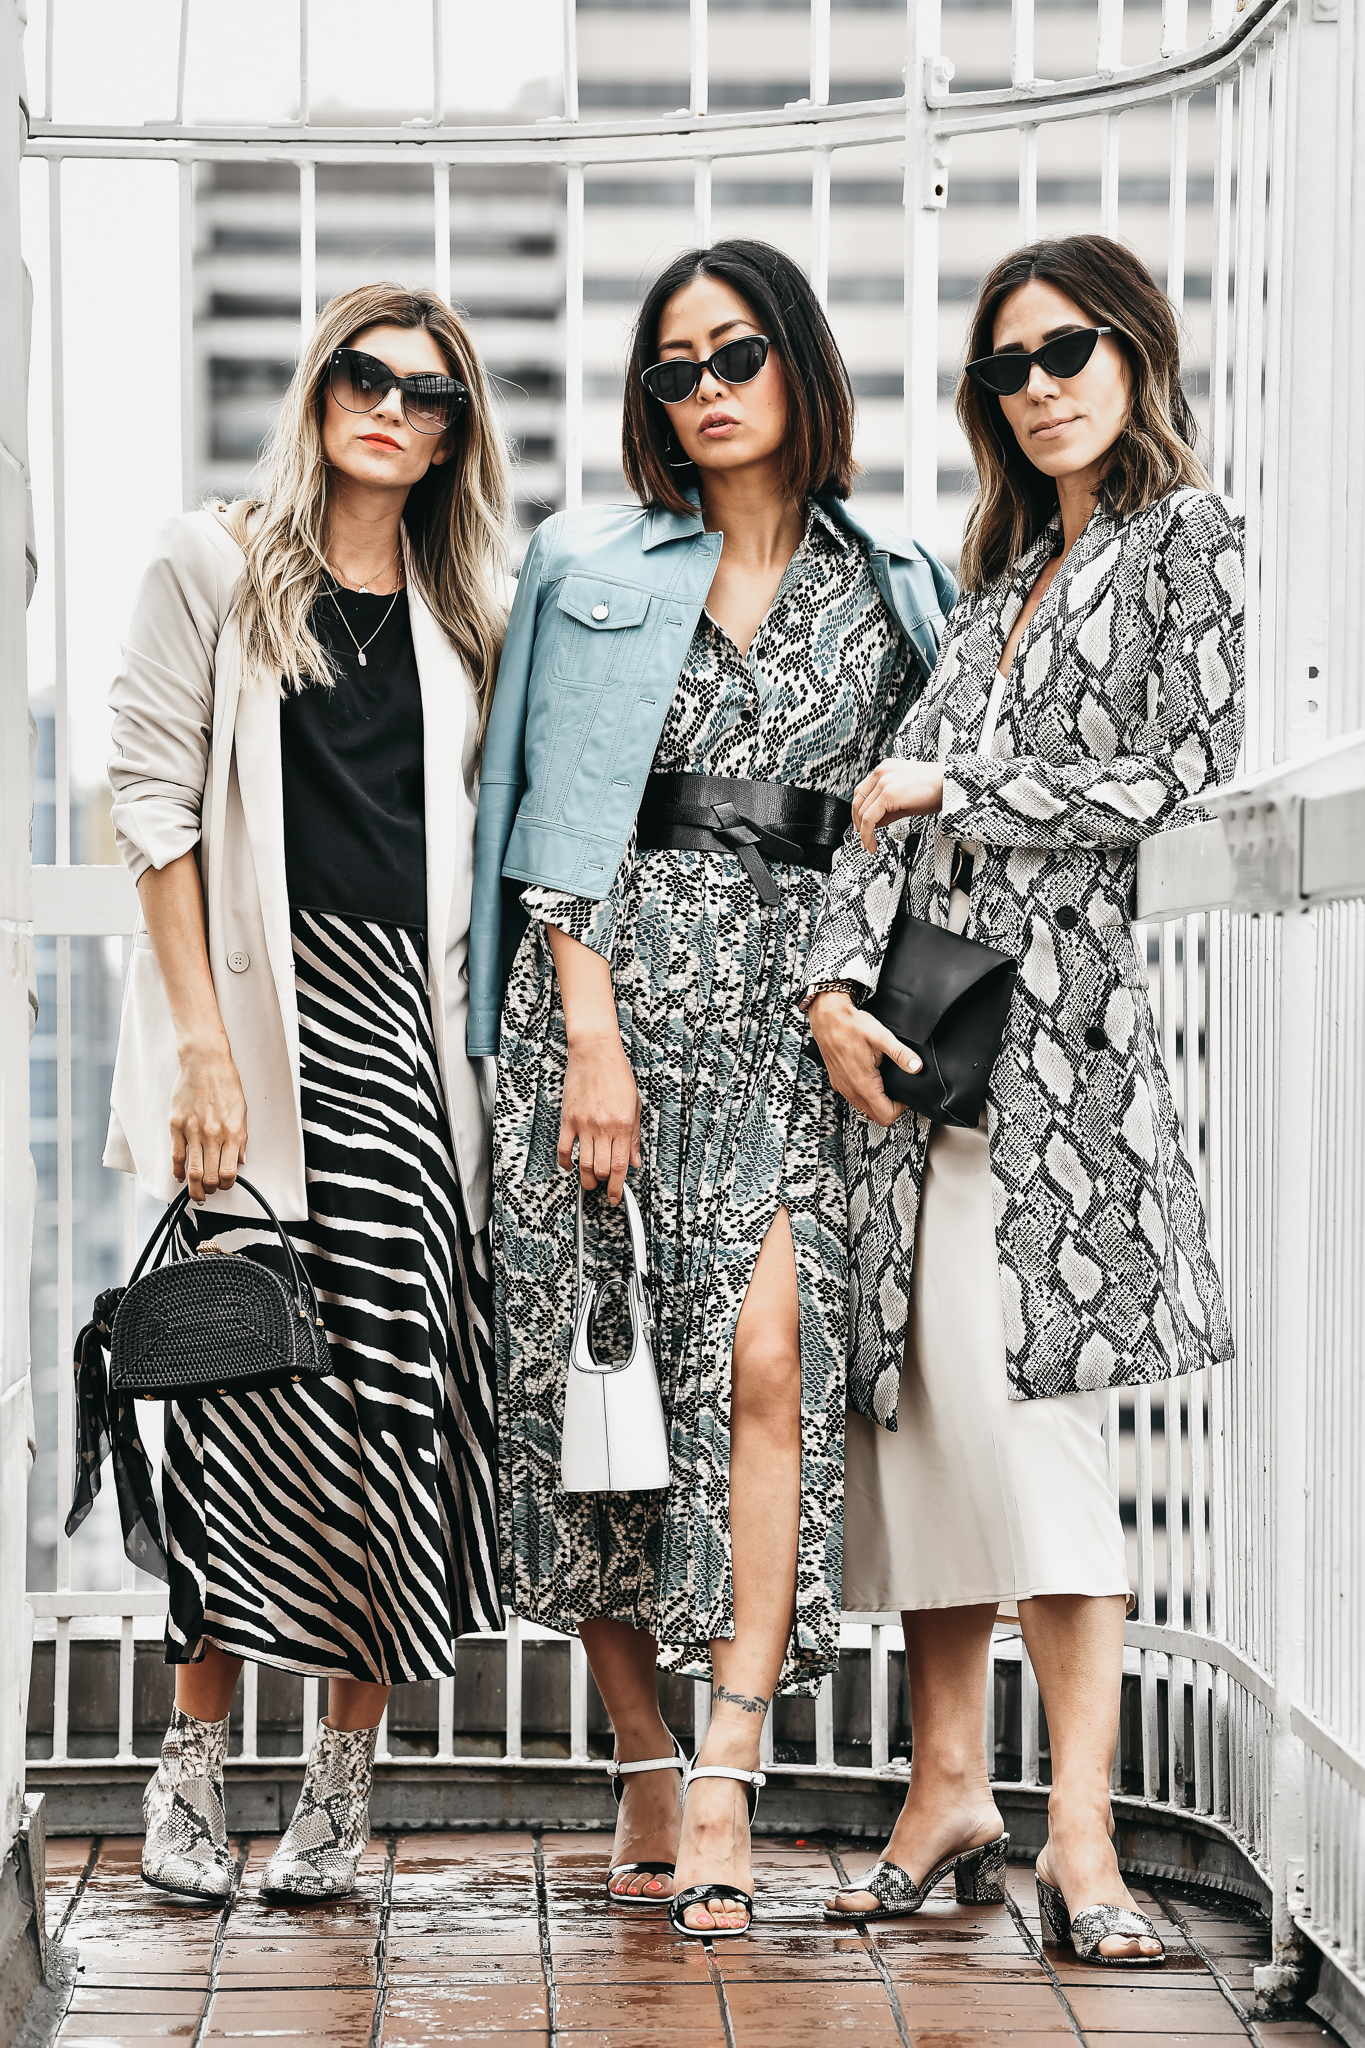 The Grey Edit - Stylelogue - Caged Animal Print - Smith Tower Observatory - July Trend Report - Blogger Collaboration